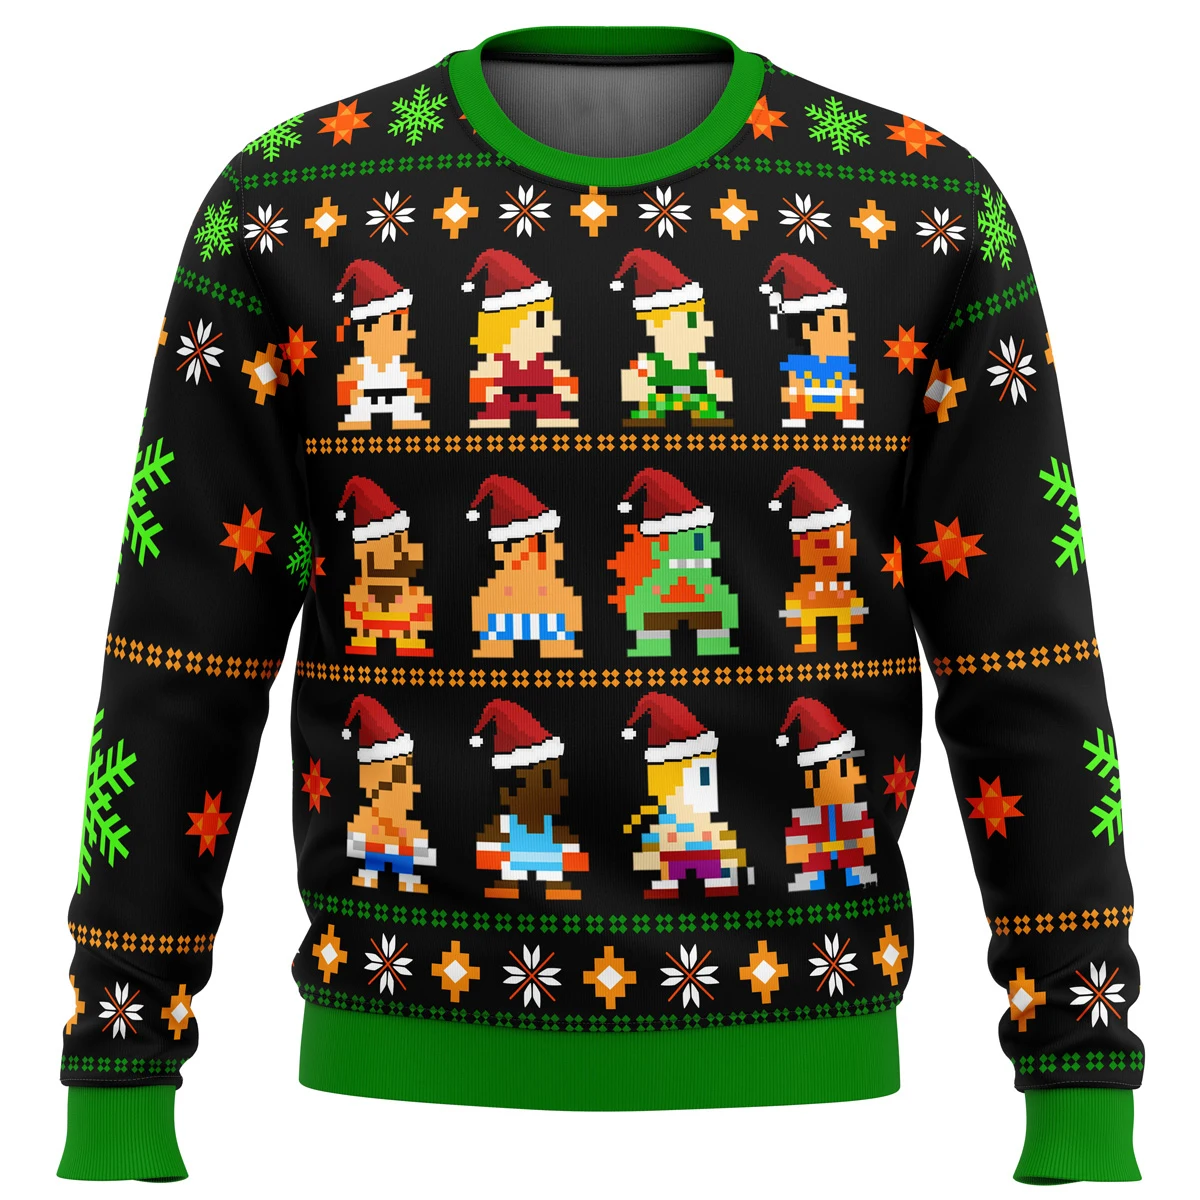 

Street Fighter Classic Collection Ugly Christmas Sweater Christmas Sweater gift Santa Claus pullover men 3D Sweatshirt and top a